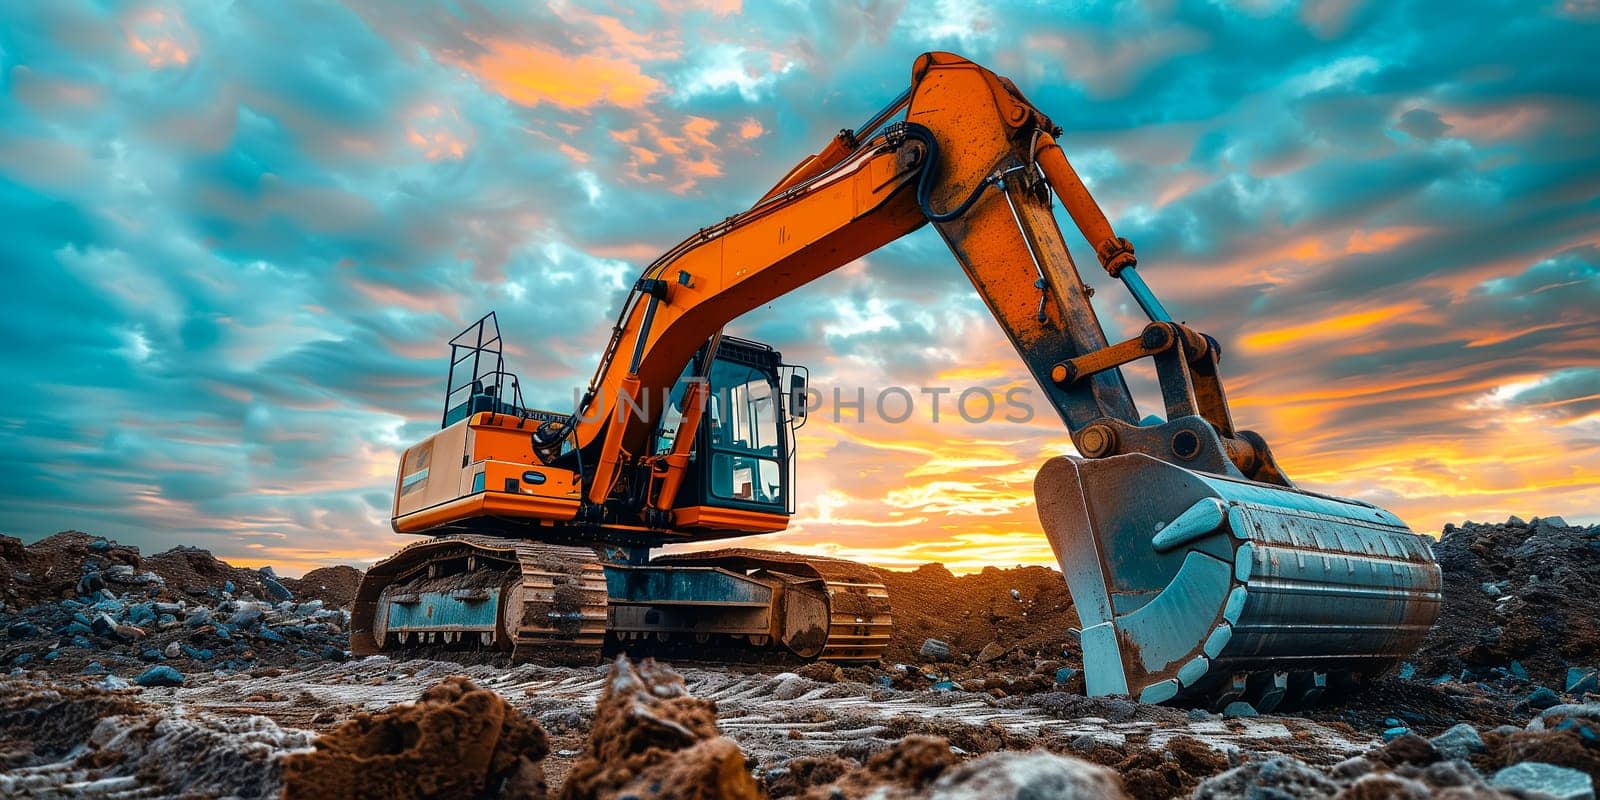 Crawler excavator front view digging on demolition site in backlight by sarymsakov